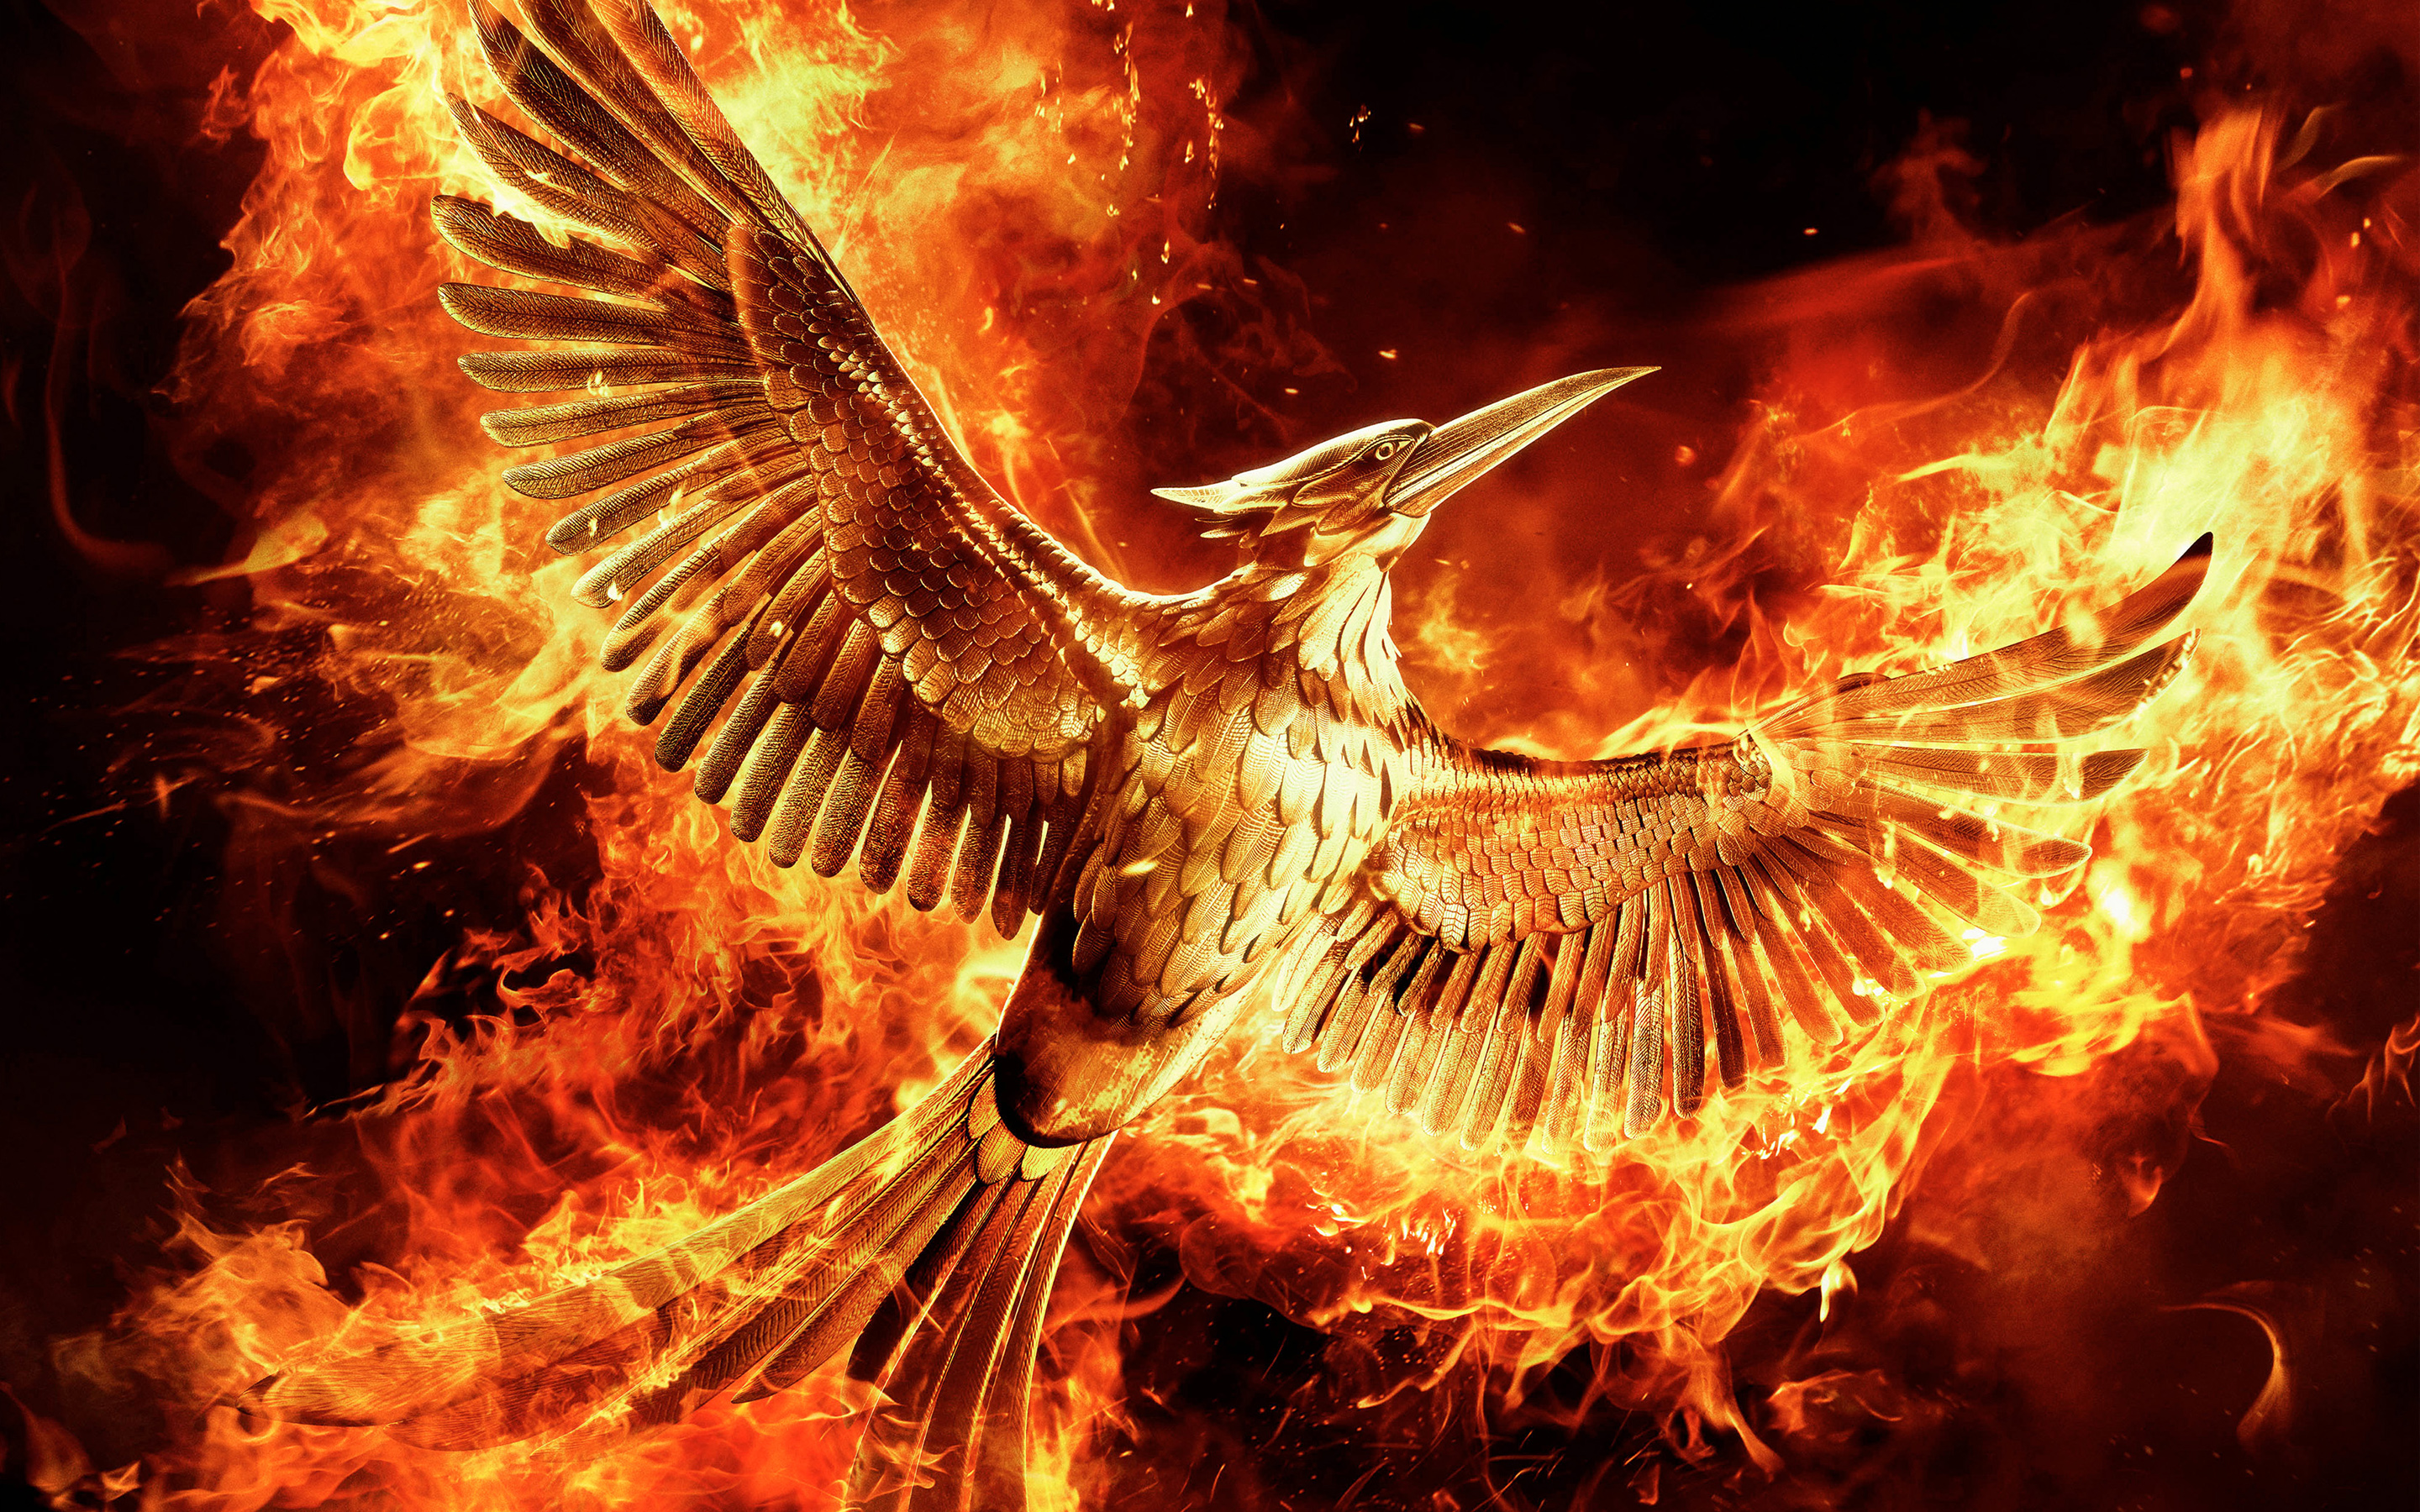 Hunger Games Mockingjay Part 2 Wallpapers   HD Wallpapers 103769 2880x1800